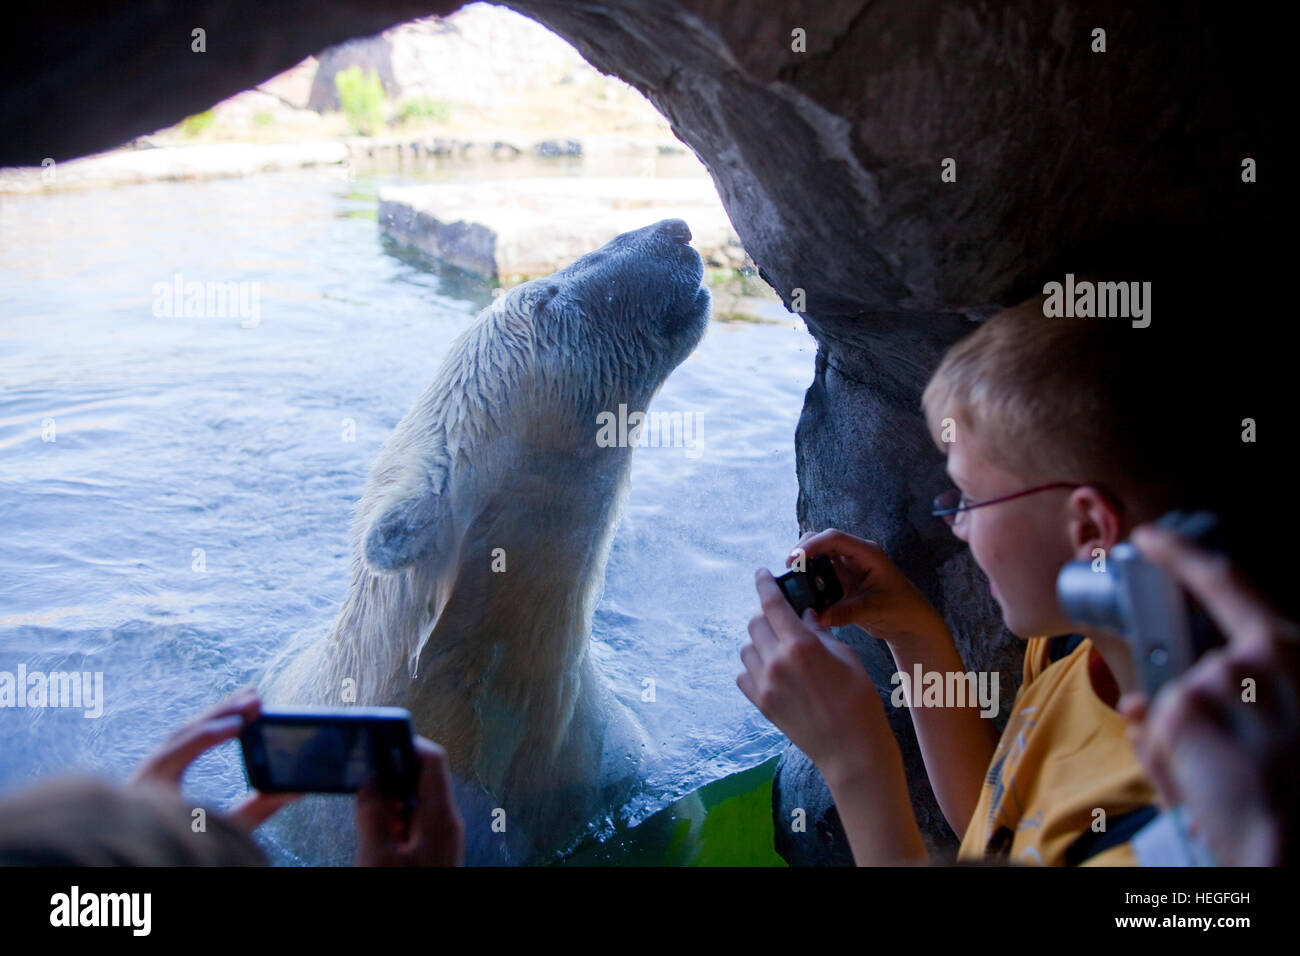 Germany, Ruhr area, Gelsenkirchen, the zoo Zoom Erlebniswelt, children taking pictures of a polar bear. Stock Photo